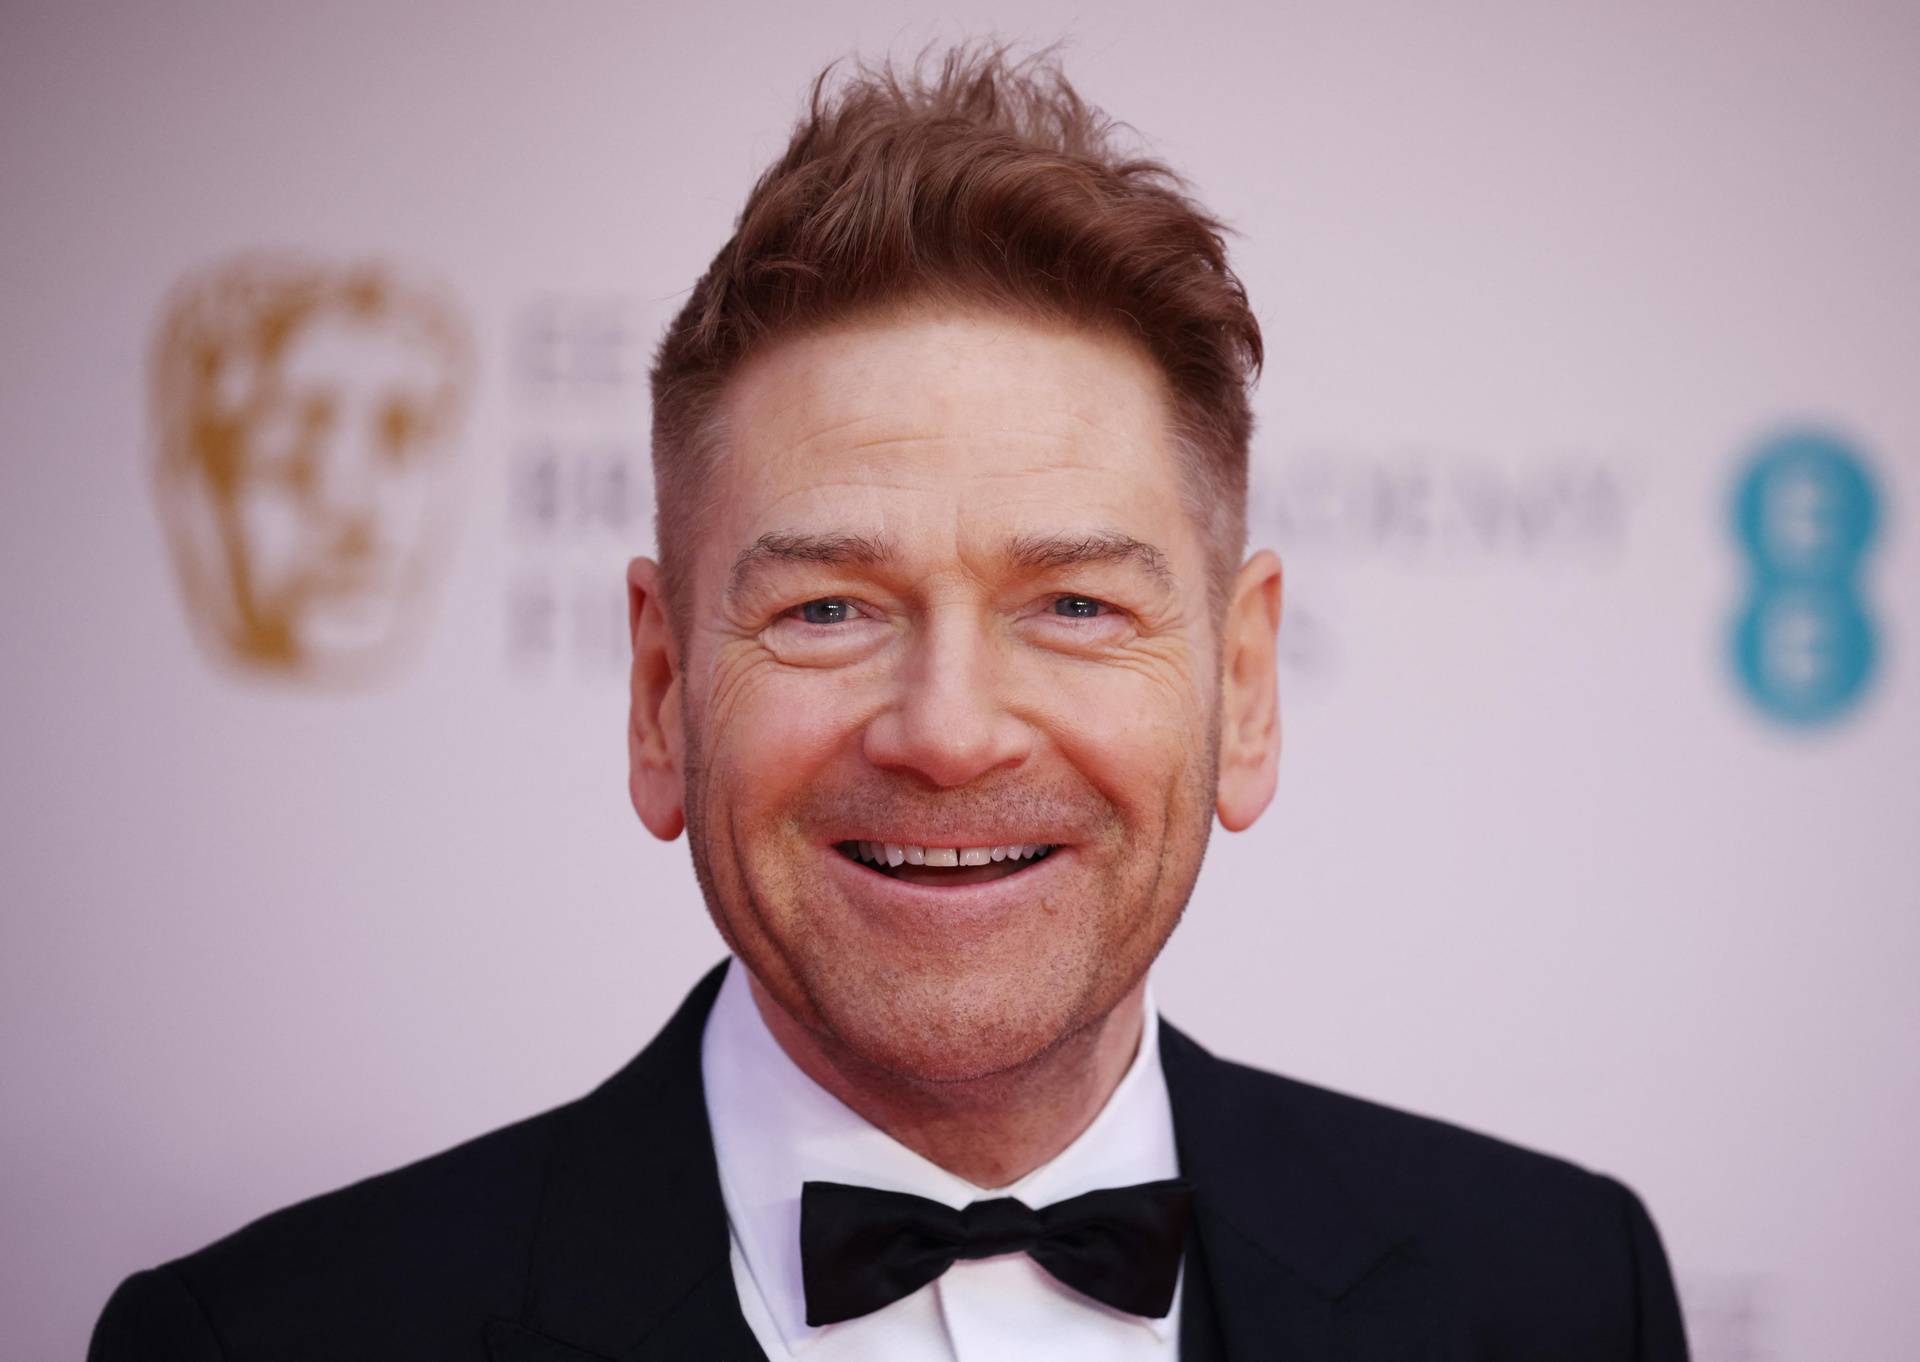 The 75th British Academy of Film and Television Awards at the Royal Albert Hall in London